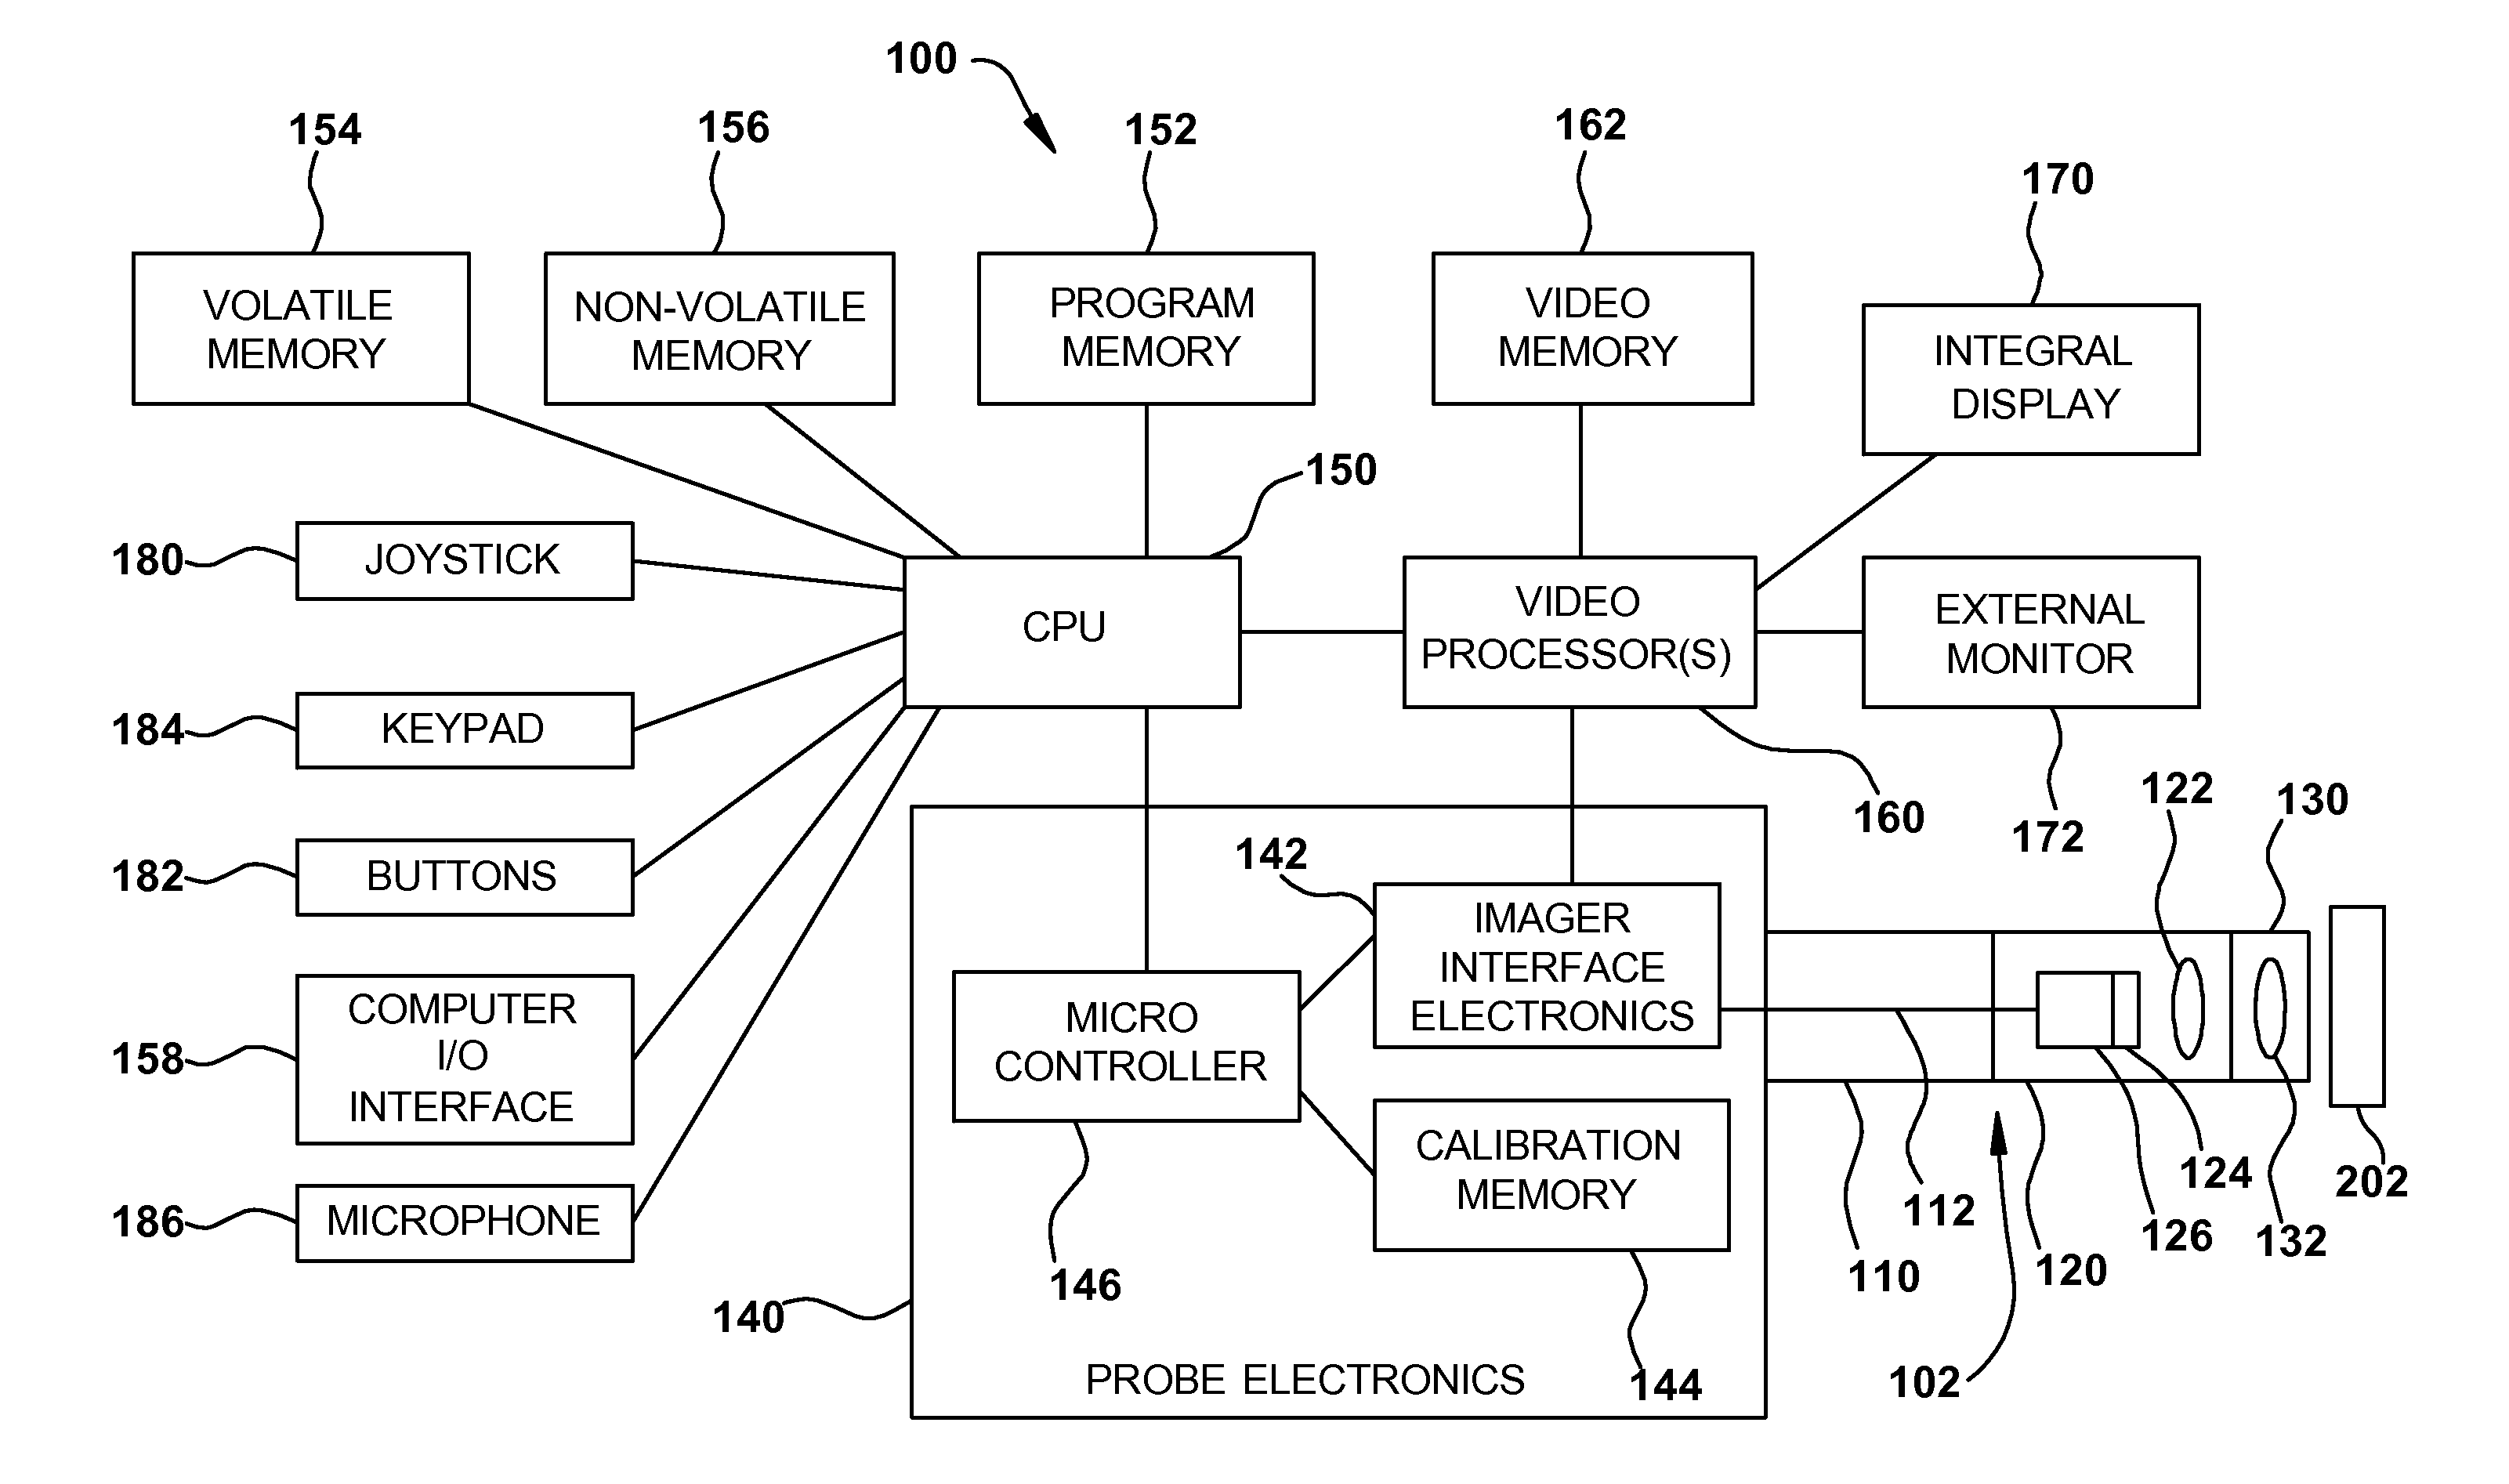 Method and device for displaying an indication of the quality of the three-dimensional data for a surface of a viewed object